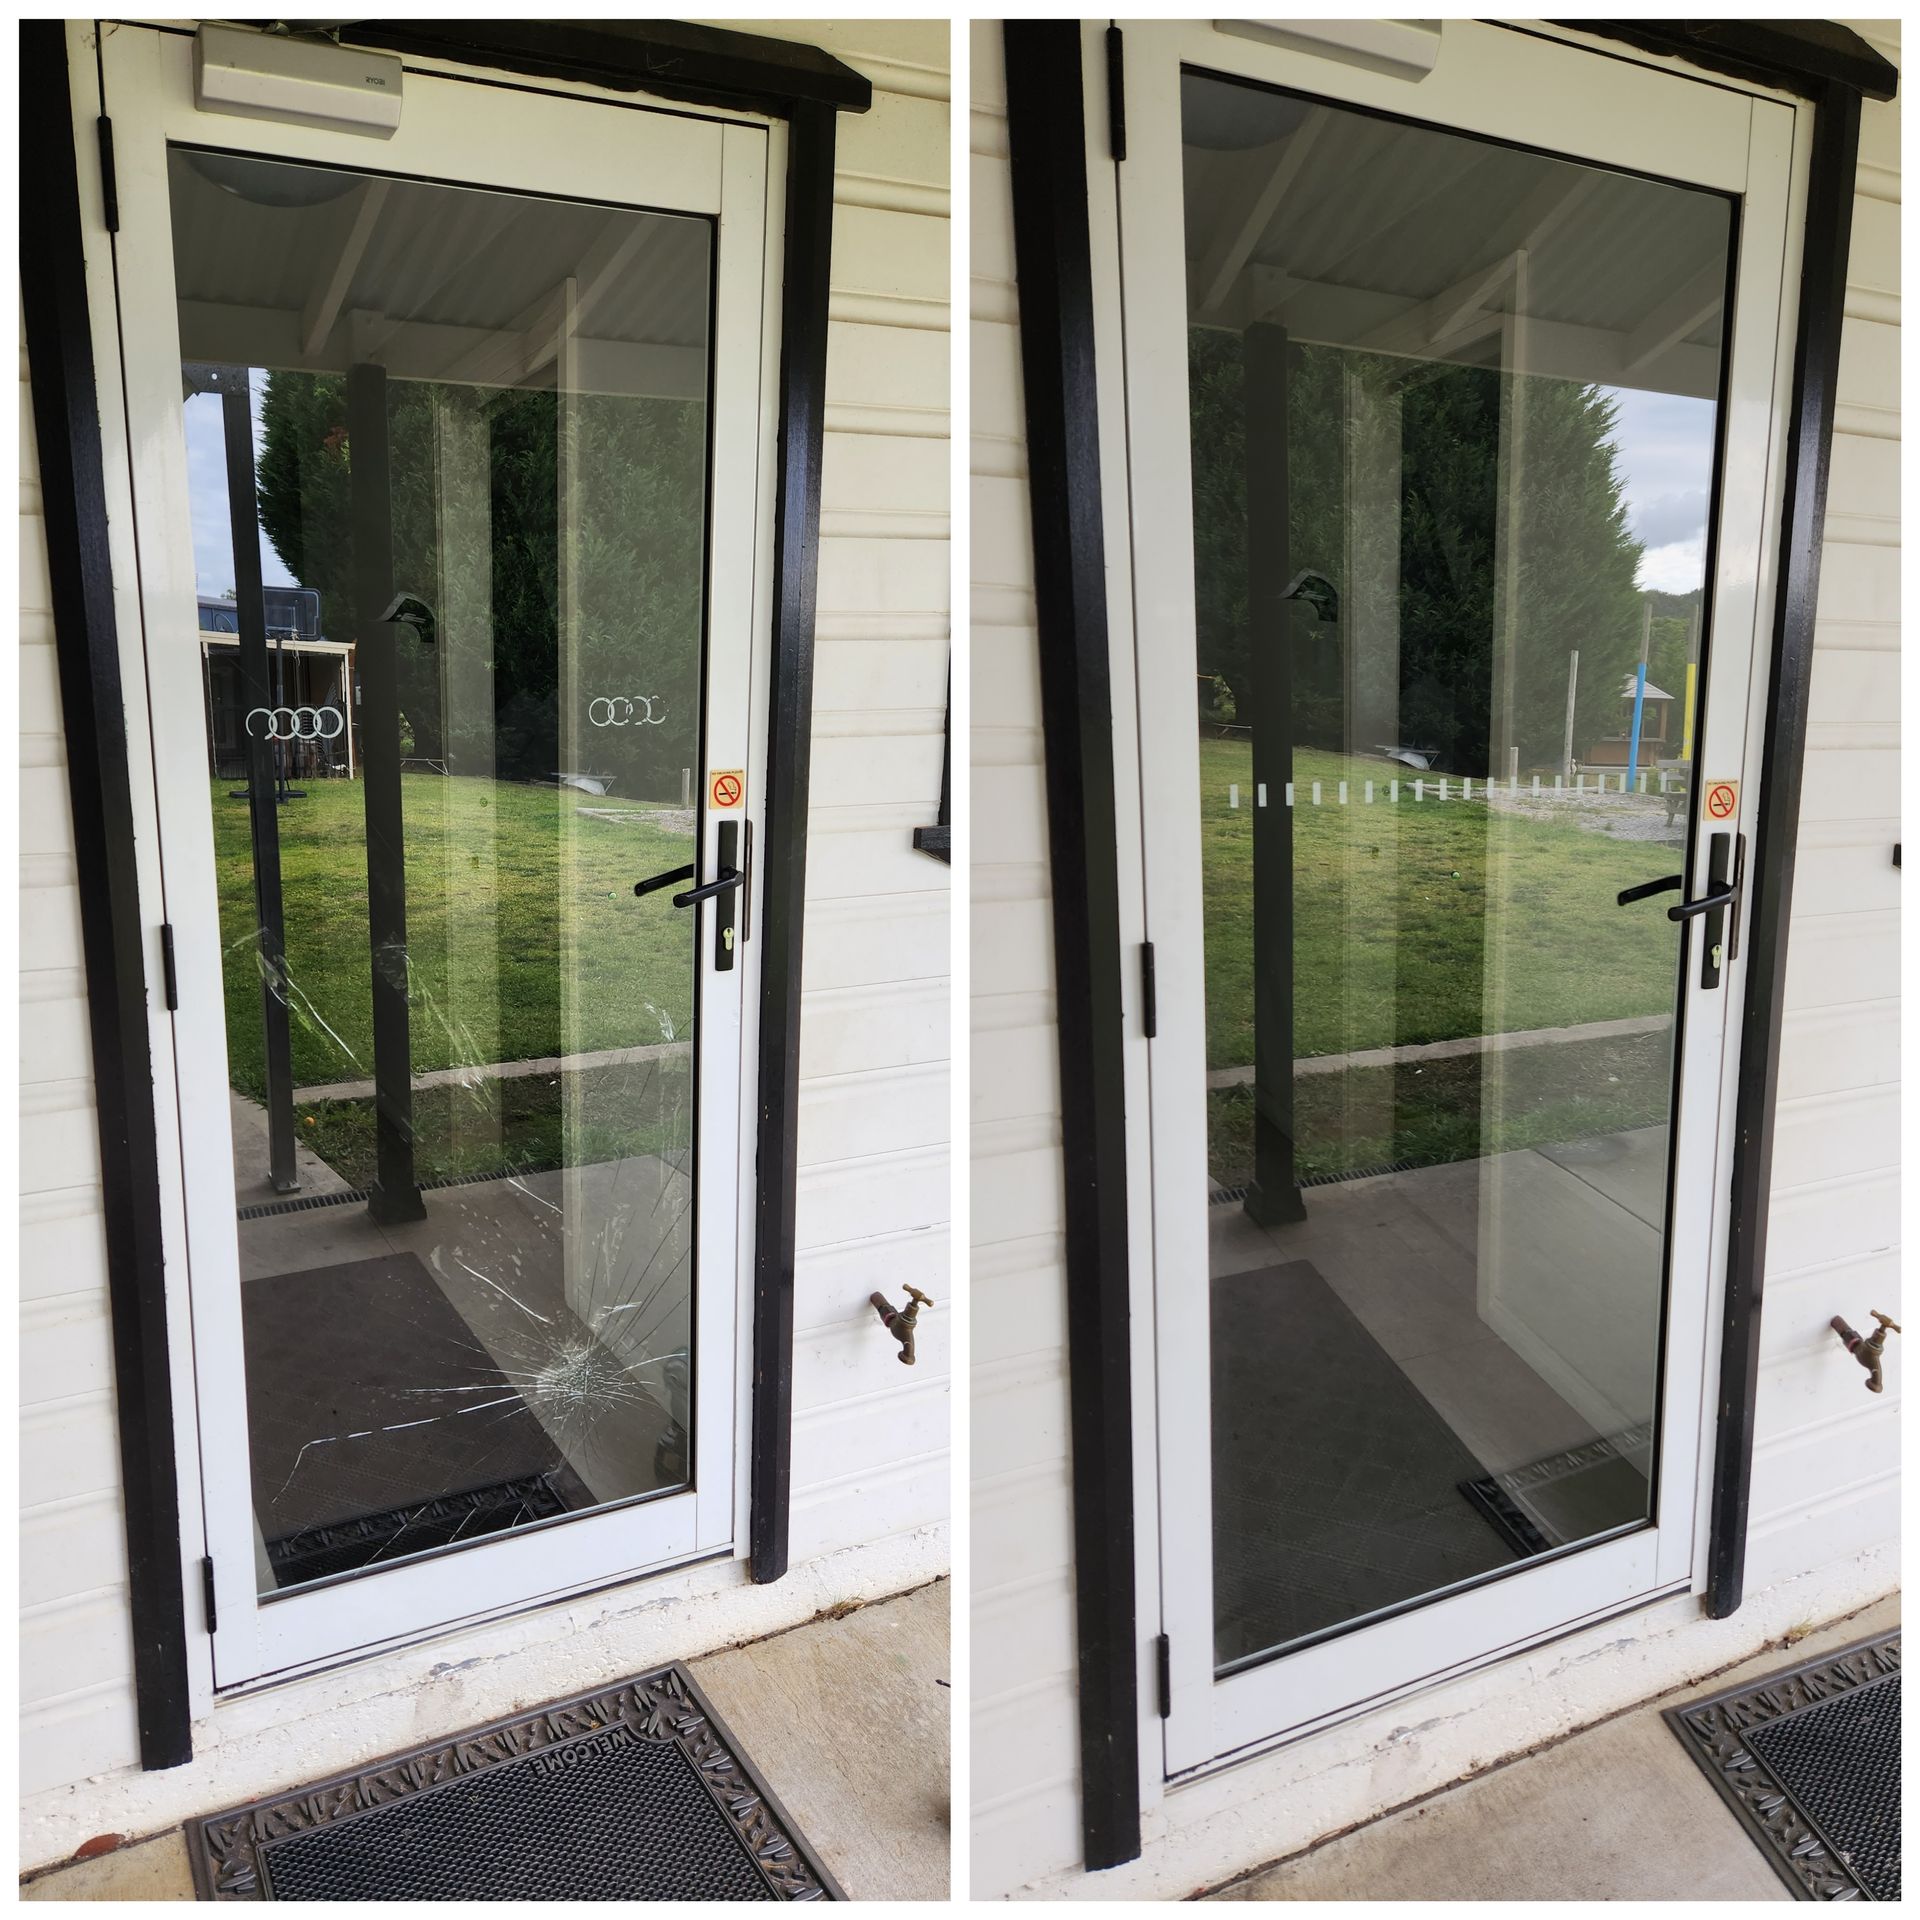 Door Glass Repair Before and After - Glazier in the Southern Highlands